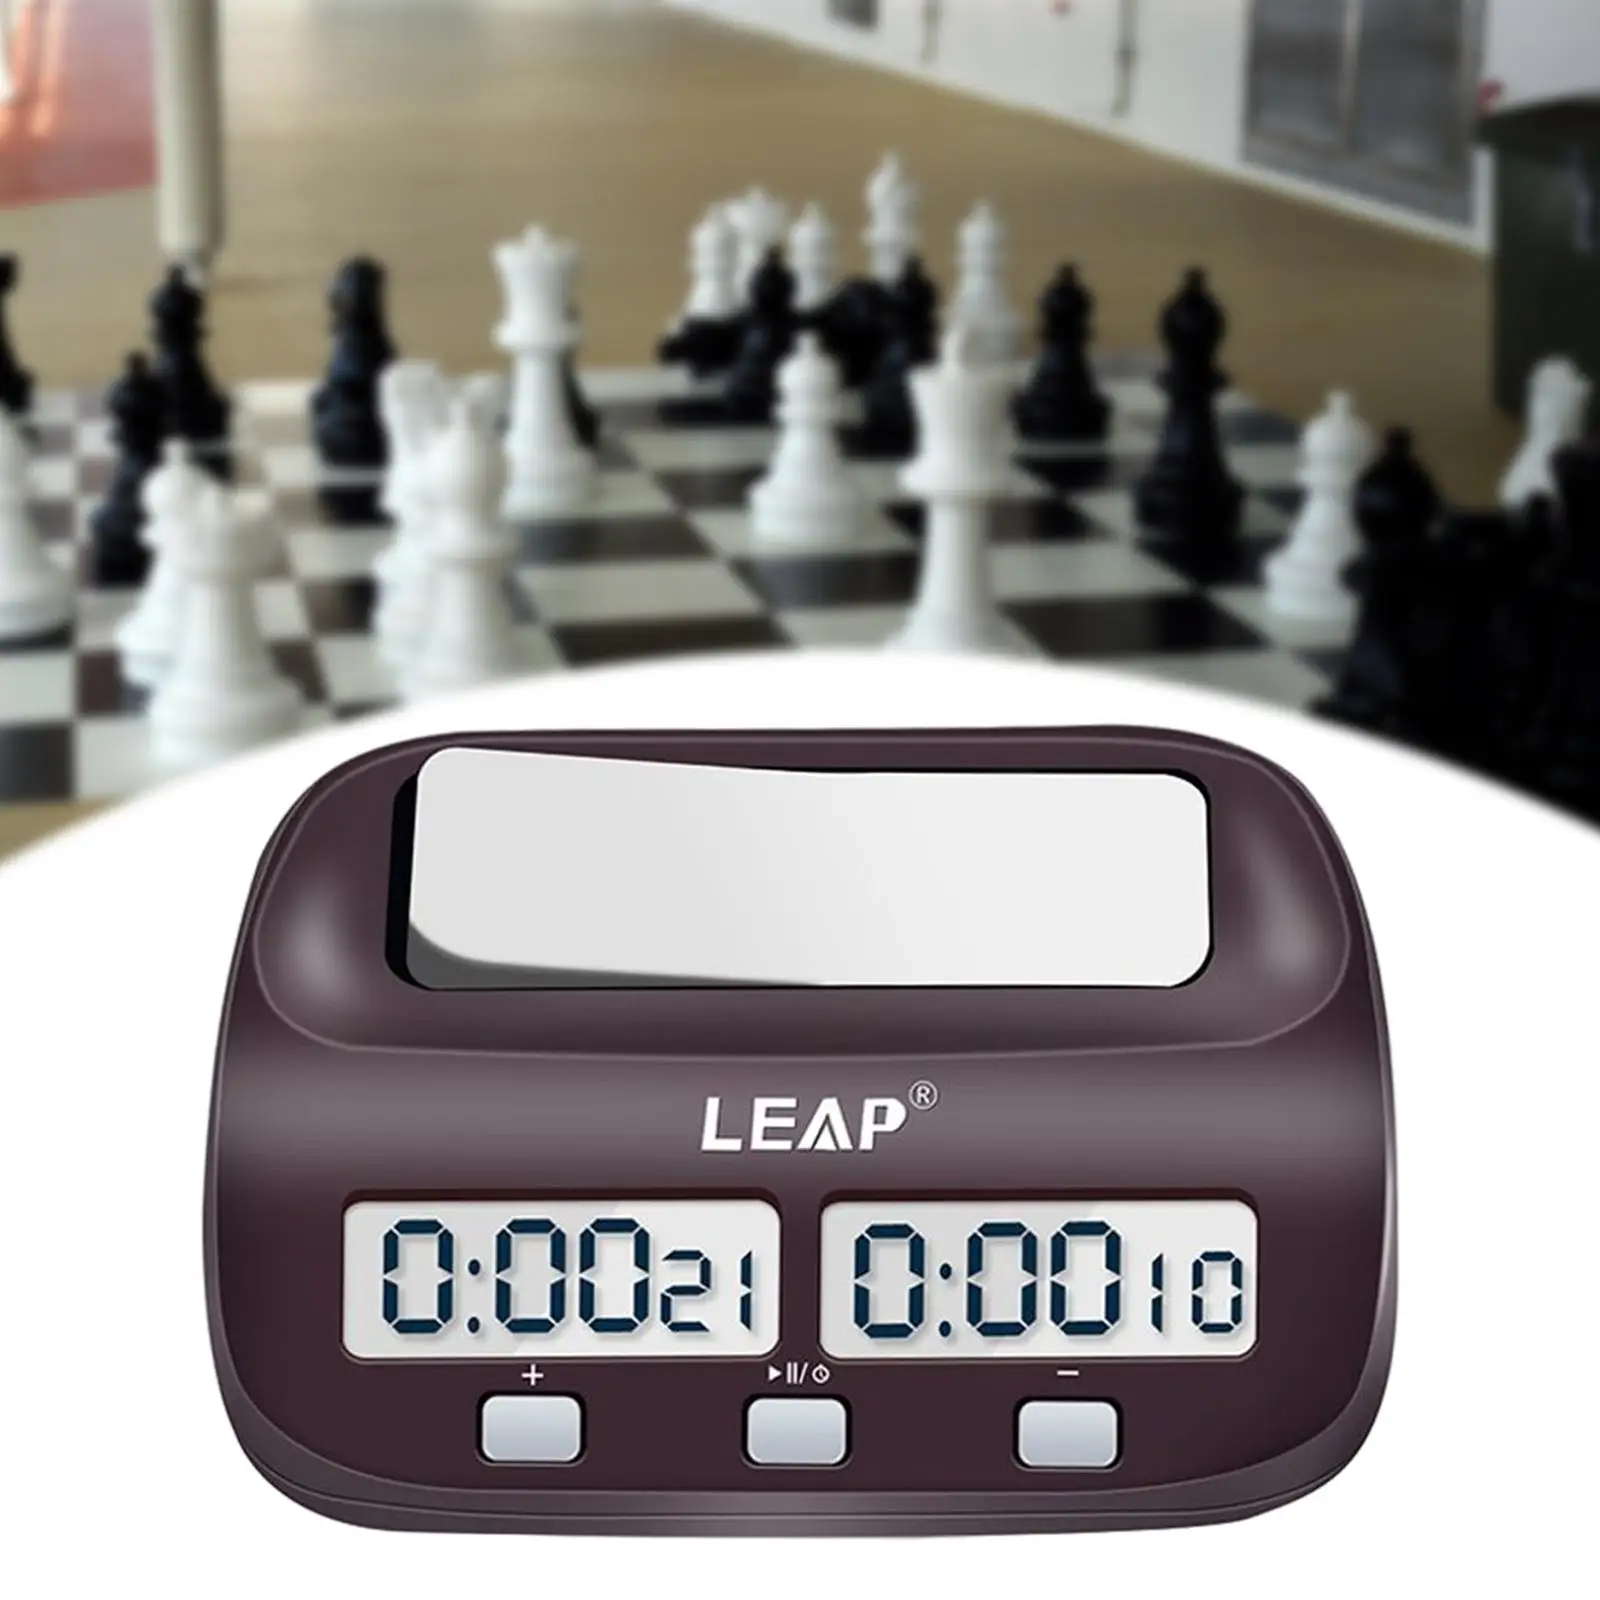 Chess Clock Compact  Responsive  Function  Alarm Function Professional Chess  for International Chess